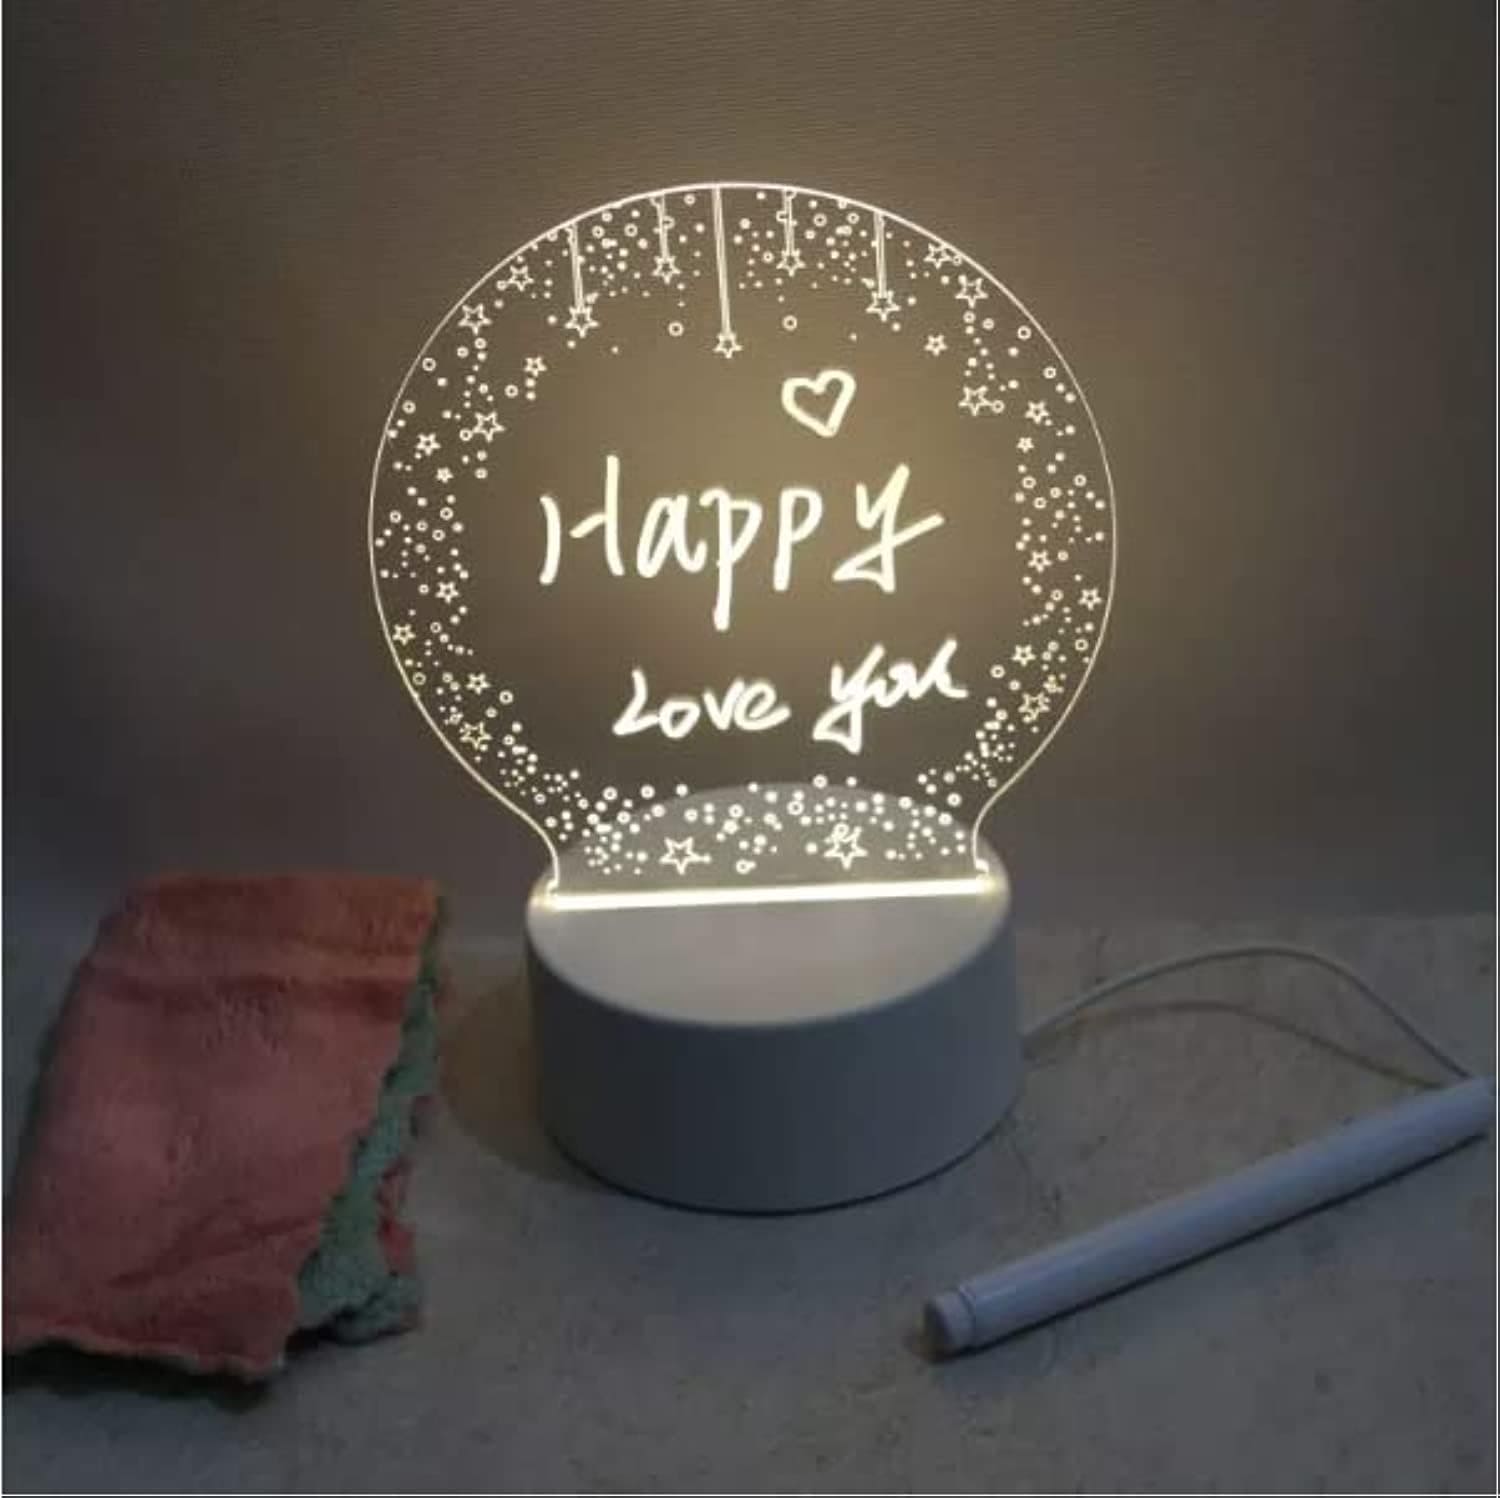 Bulb Shape Led Writing Board, 3D LED Note Night Lamp, Acrylic Dry Erase Board with Stand, 3d Creative Visualization Lamp Led, Drawing Bedroom Lamp, Luminous Message Board Night Lamp